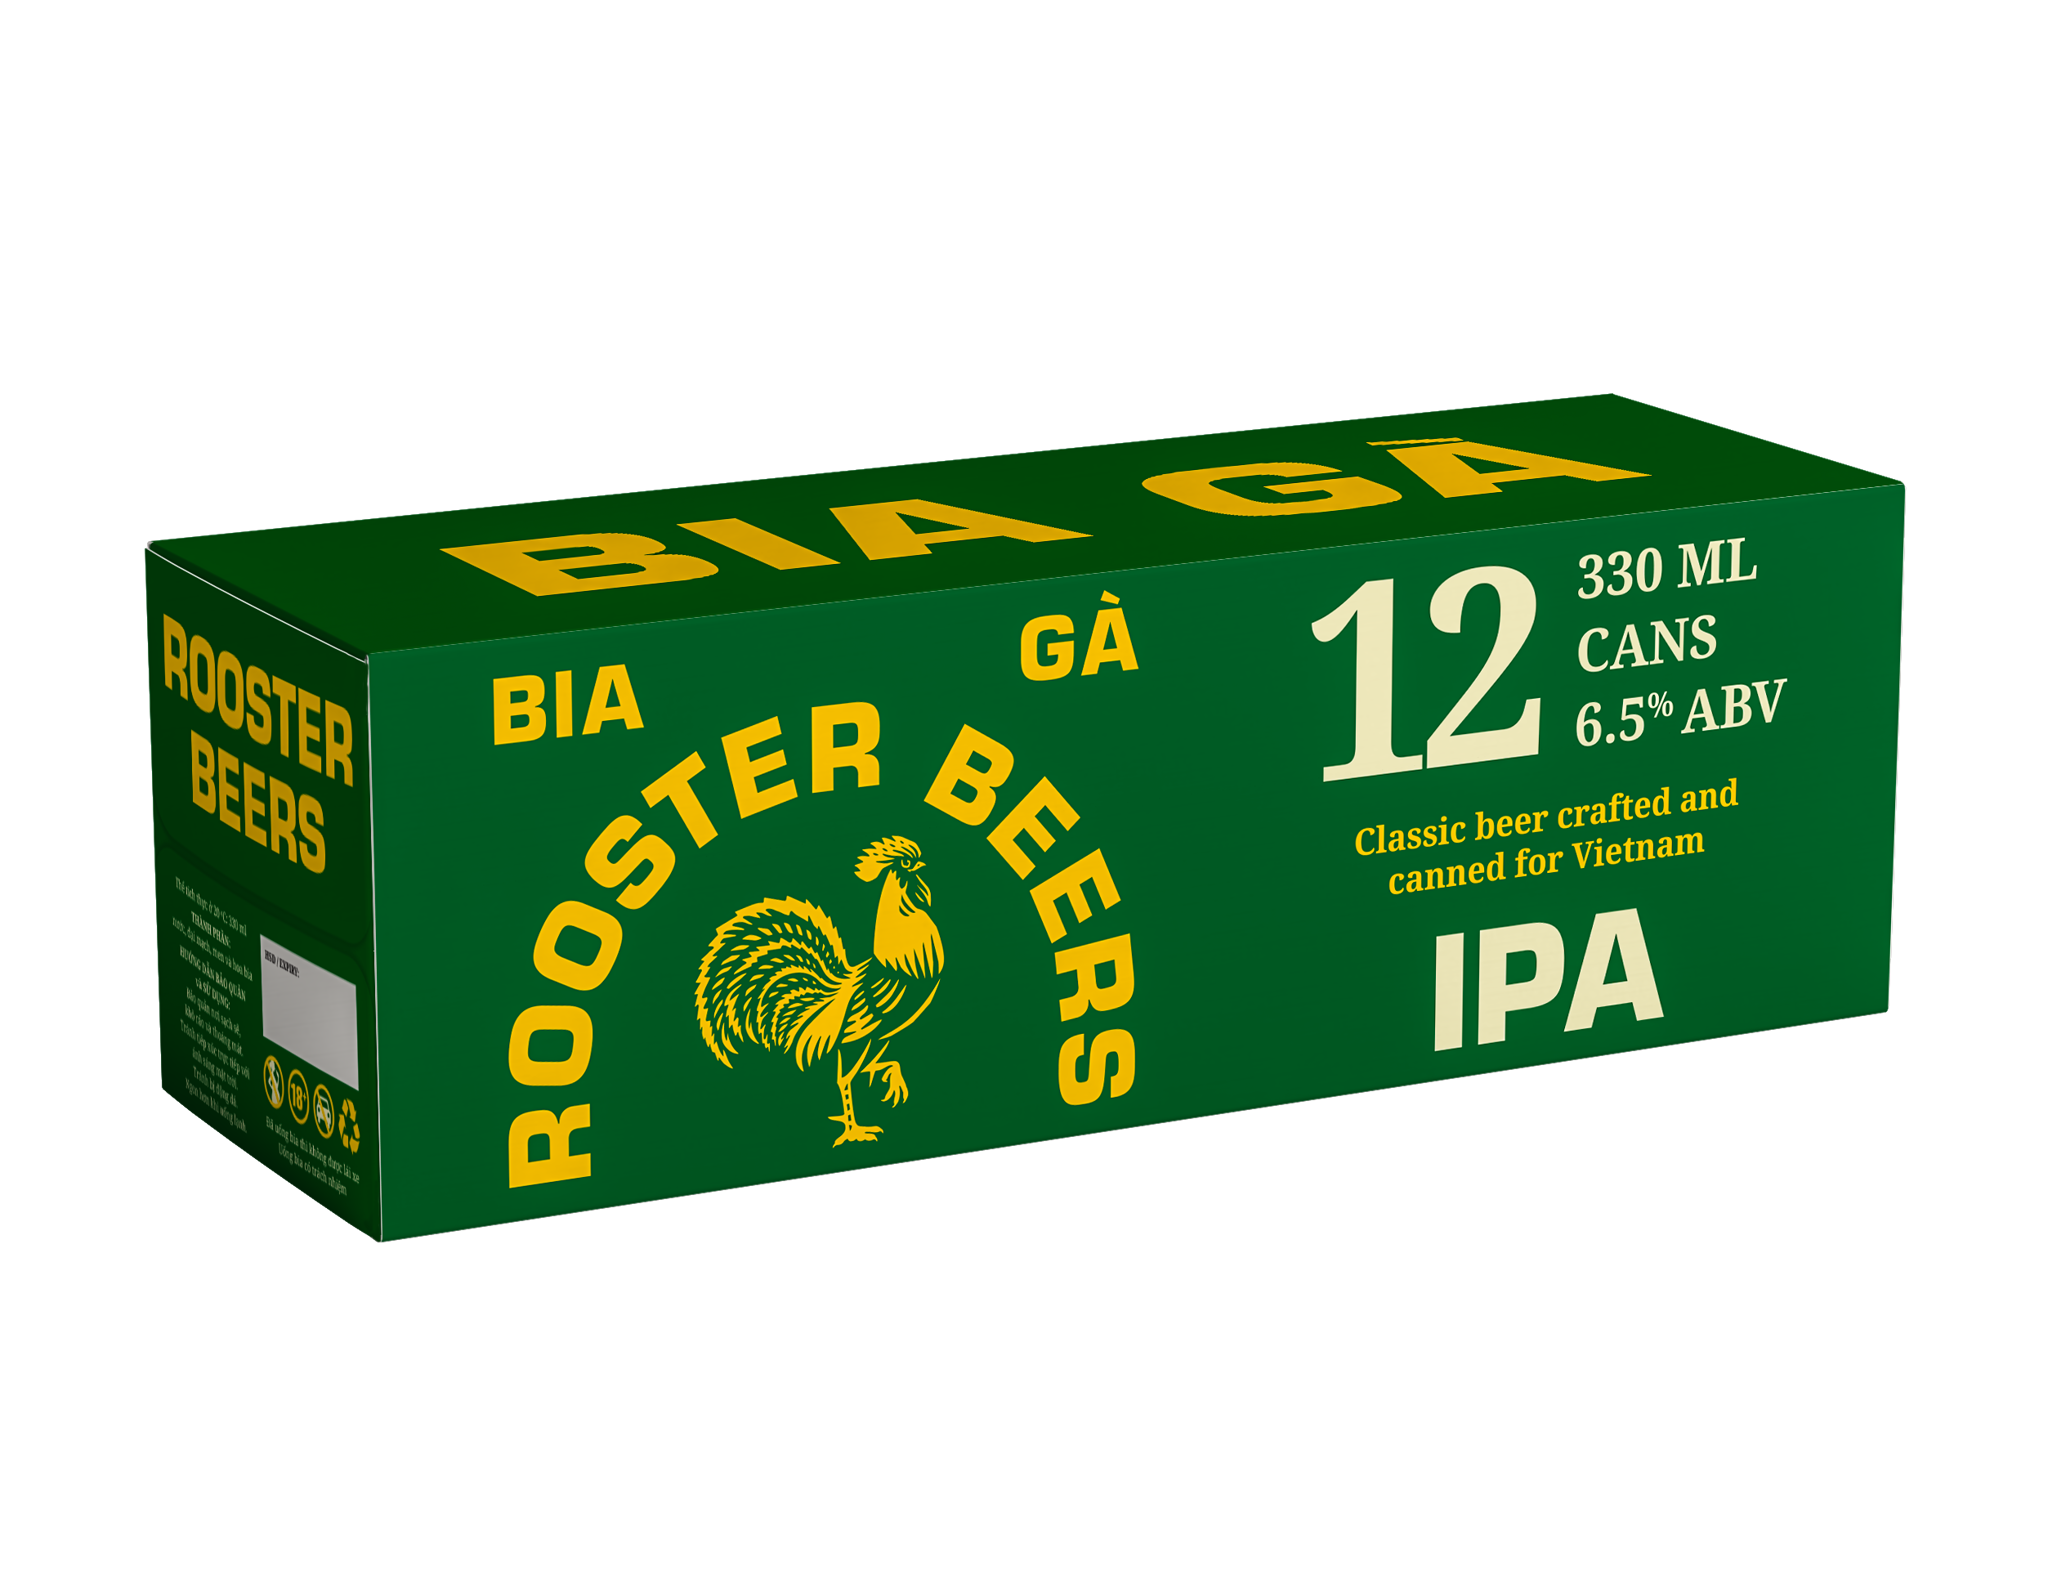  [TẶNG 1 LY] Rooster Beers IPA - Thùng 12 Lon (330ml) 